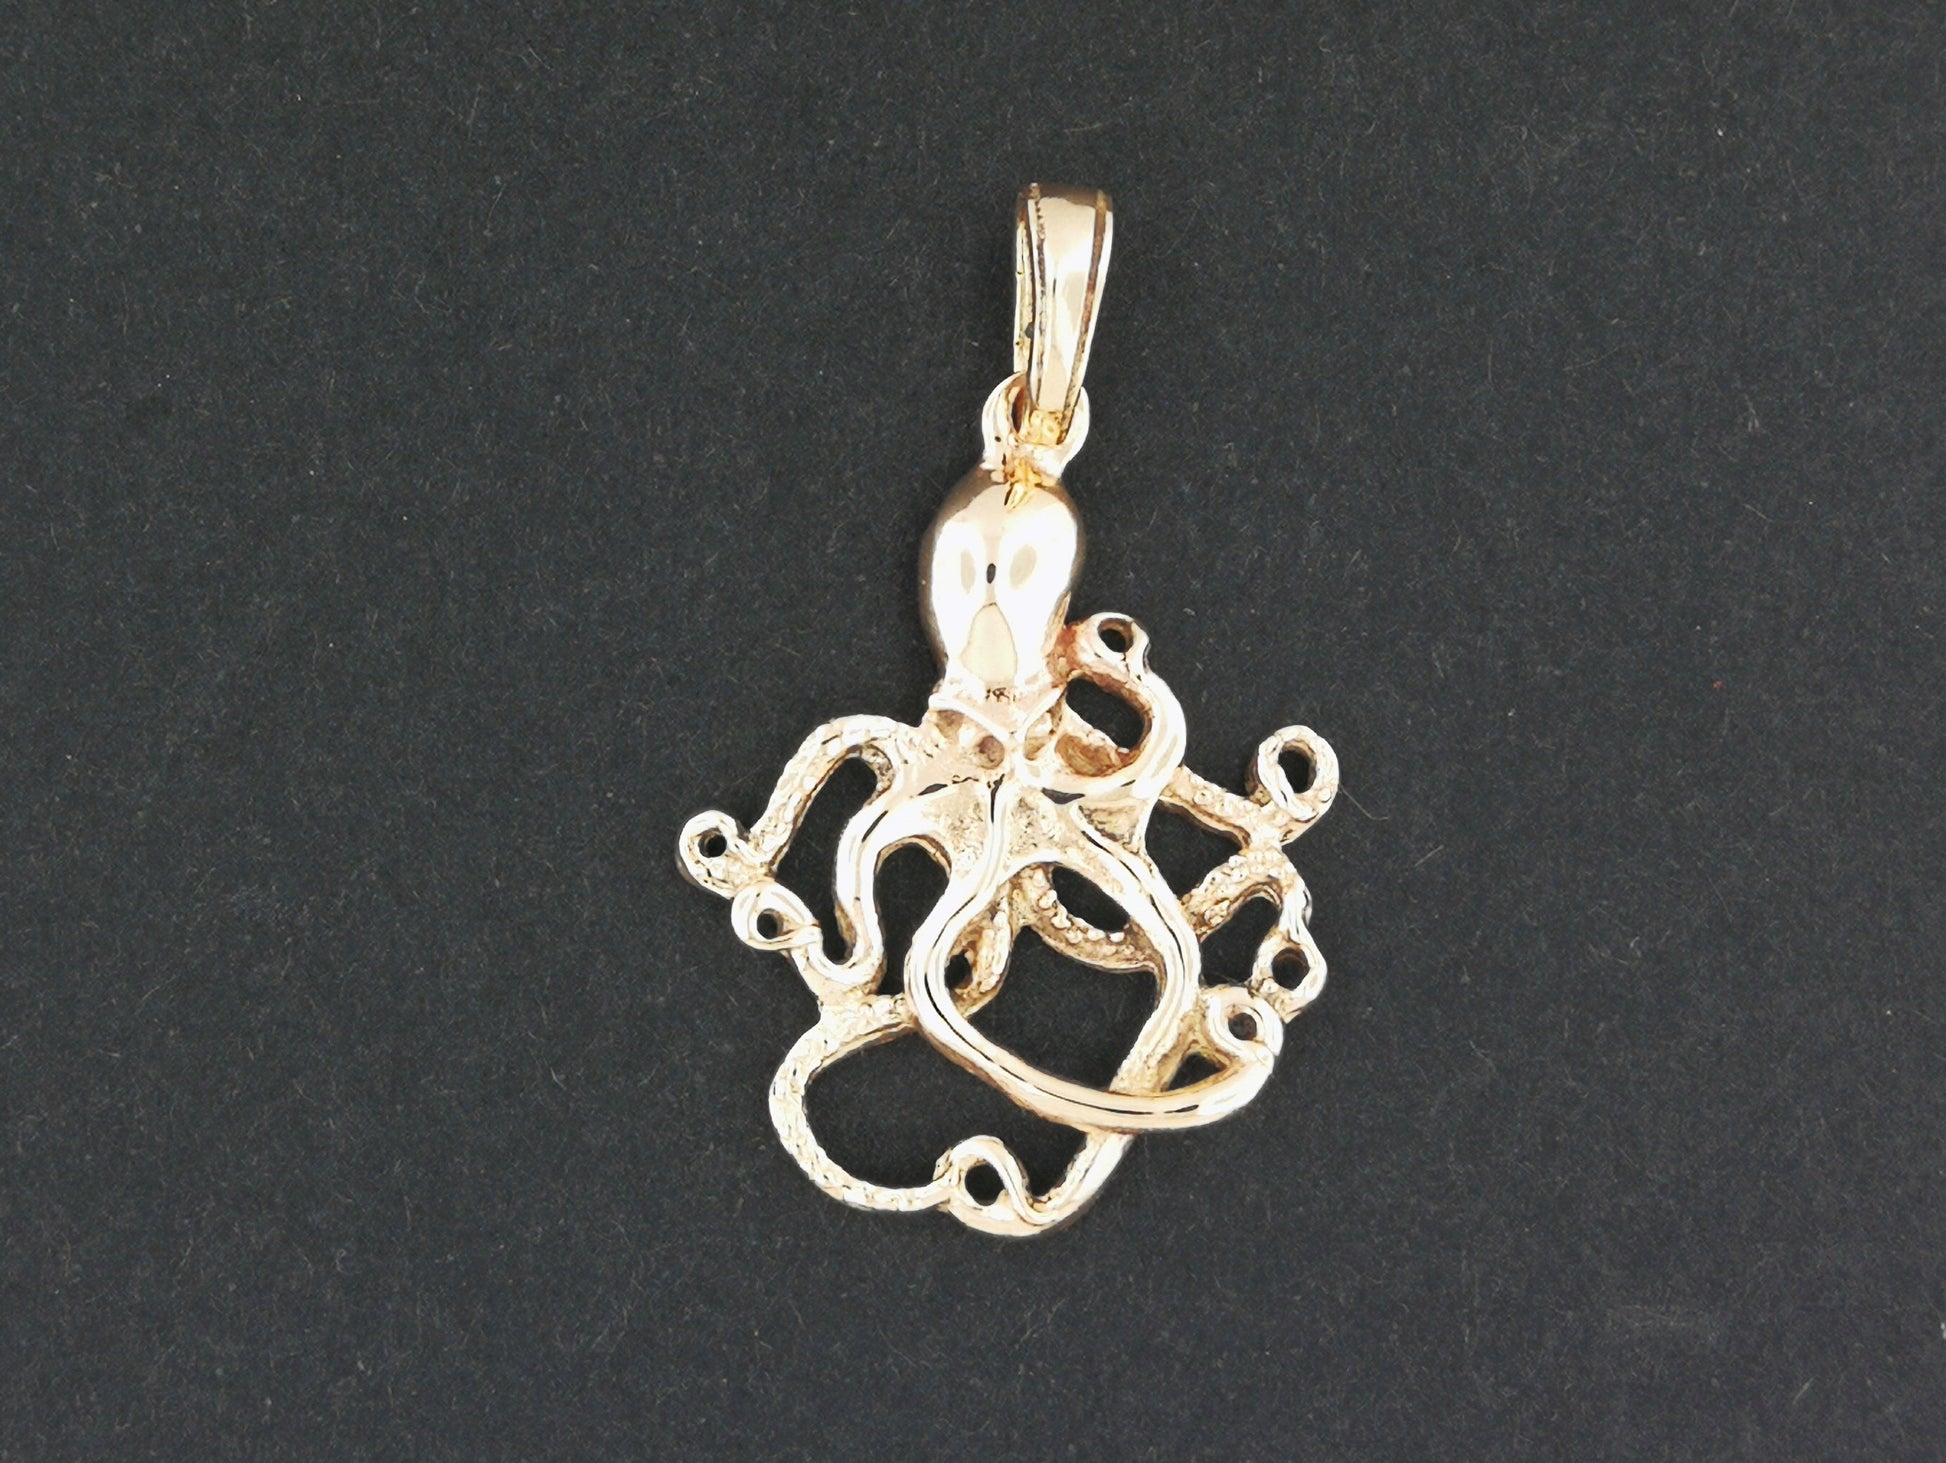 Octopus Pendant in Sterling Silver or Antique Bronze, Sterling Silver Octopus, Silver Octopus Pendant, Silver Octopus Charm, Bronze Octopus Pendant, Bronze Octopus Charm, Silver Marine Jewelry, Silver Marine Jewellery, Sea Creature Pendant, Silver Animal Pendant, Bronze Animal Pendant, Silver Octopus Jewelry, Silver Octopus Jewellery, Bronze Octopus Jewelry, Bronze Octopus Jewellery, Sea Creature Jewellery, Sea Creature Jewelry